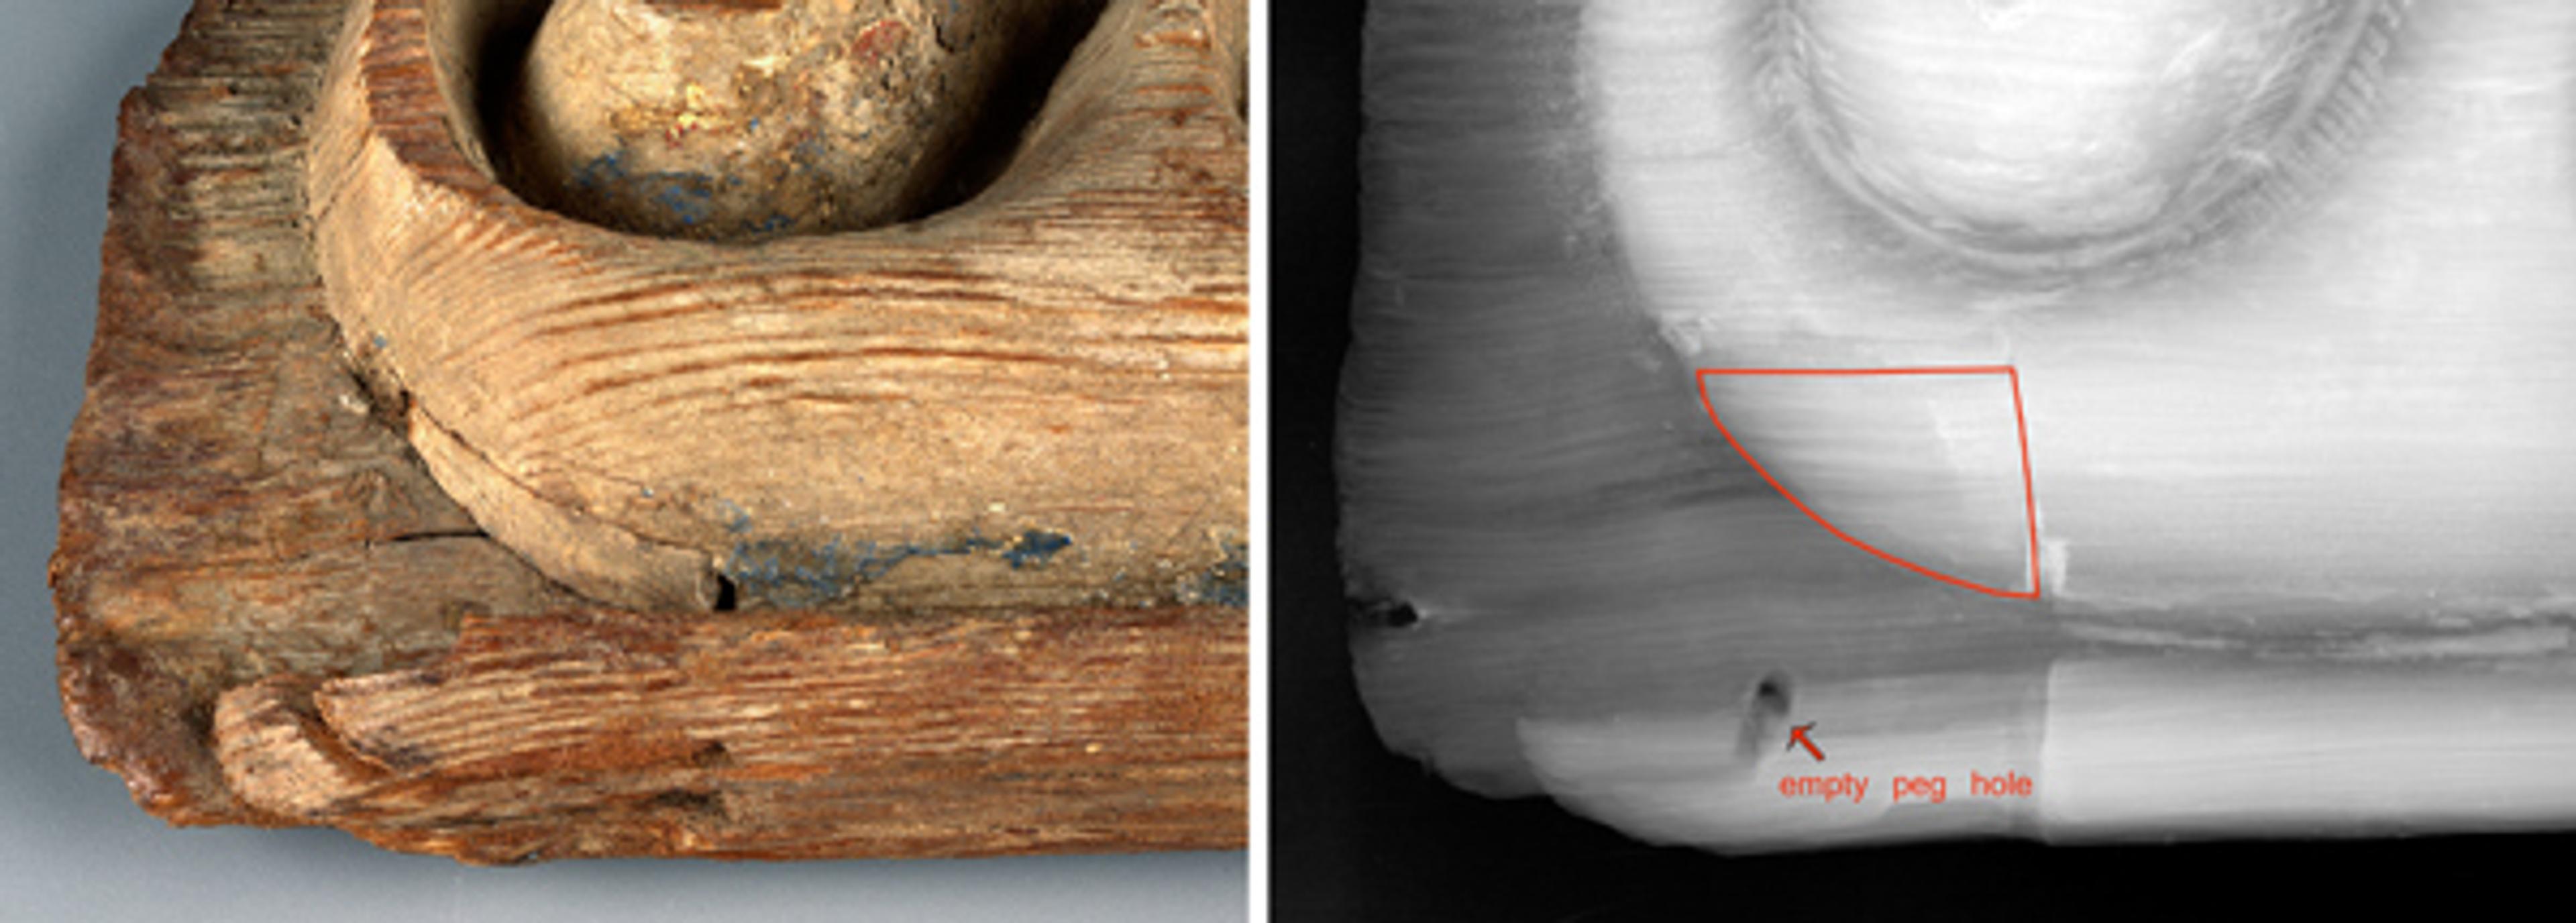 Fig. 5. Left: Lower left-hand mortise-and-tenon joint with later wood fill. Right: radiograph of joint